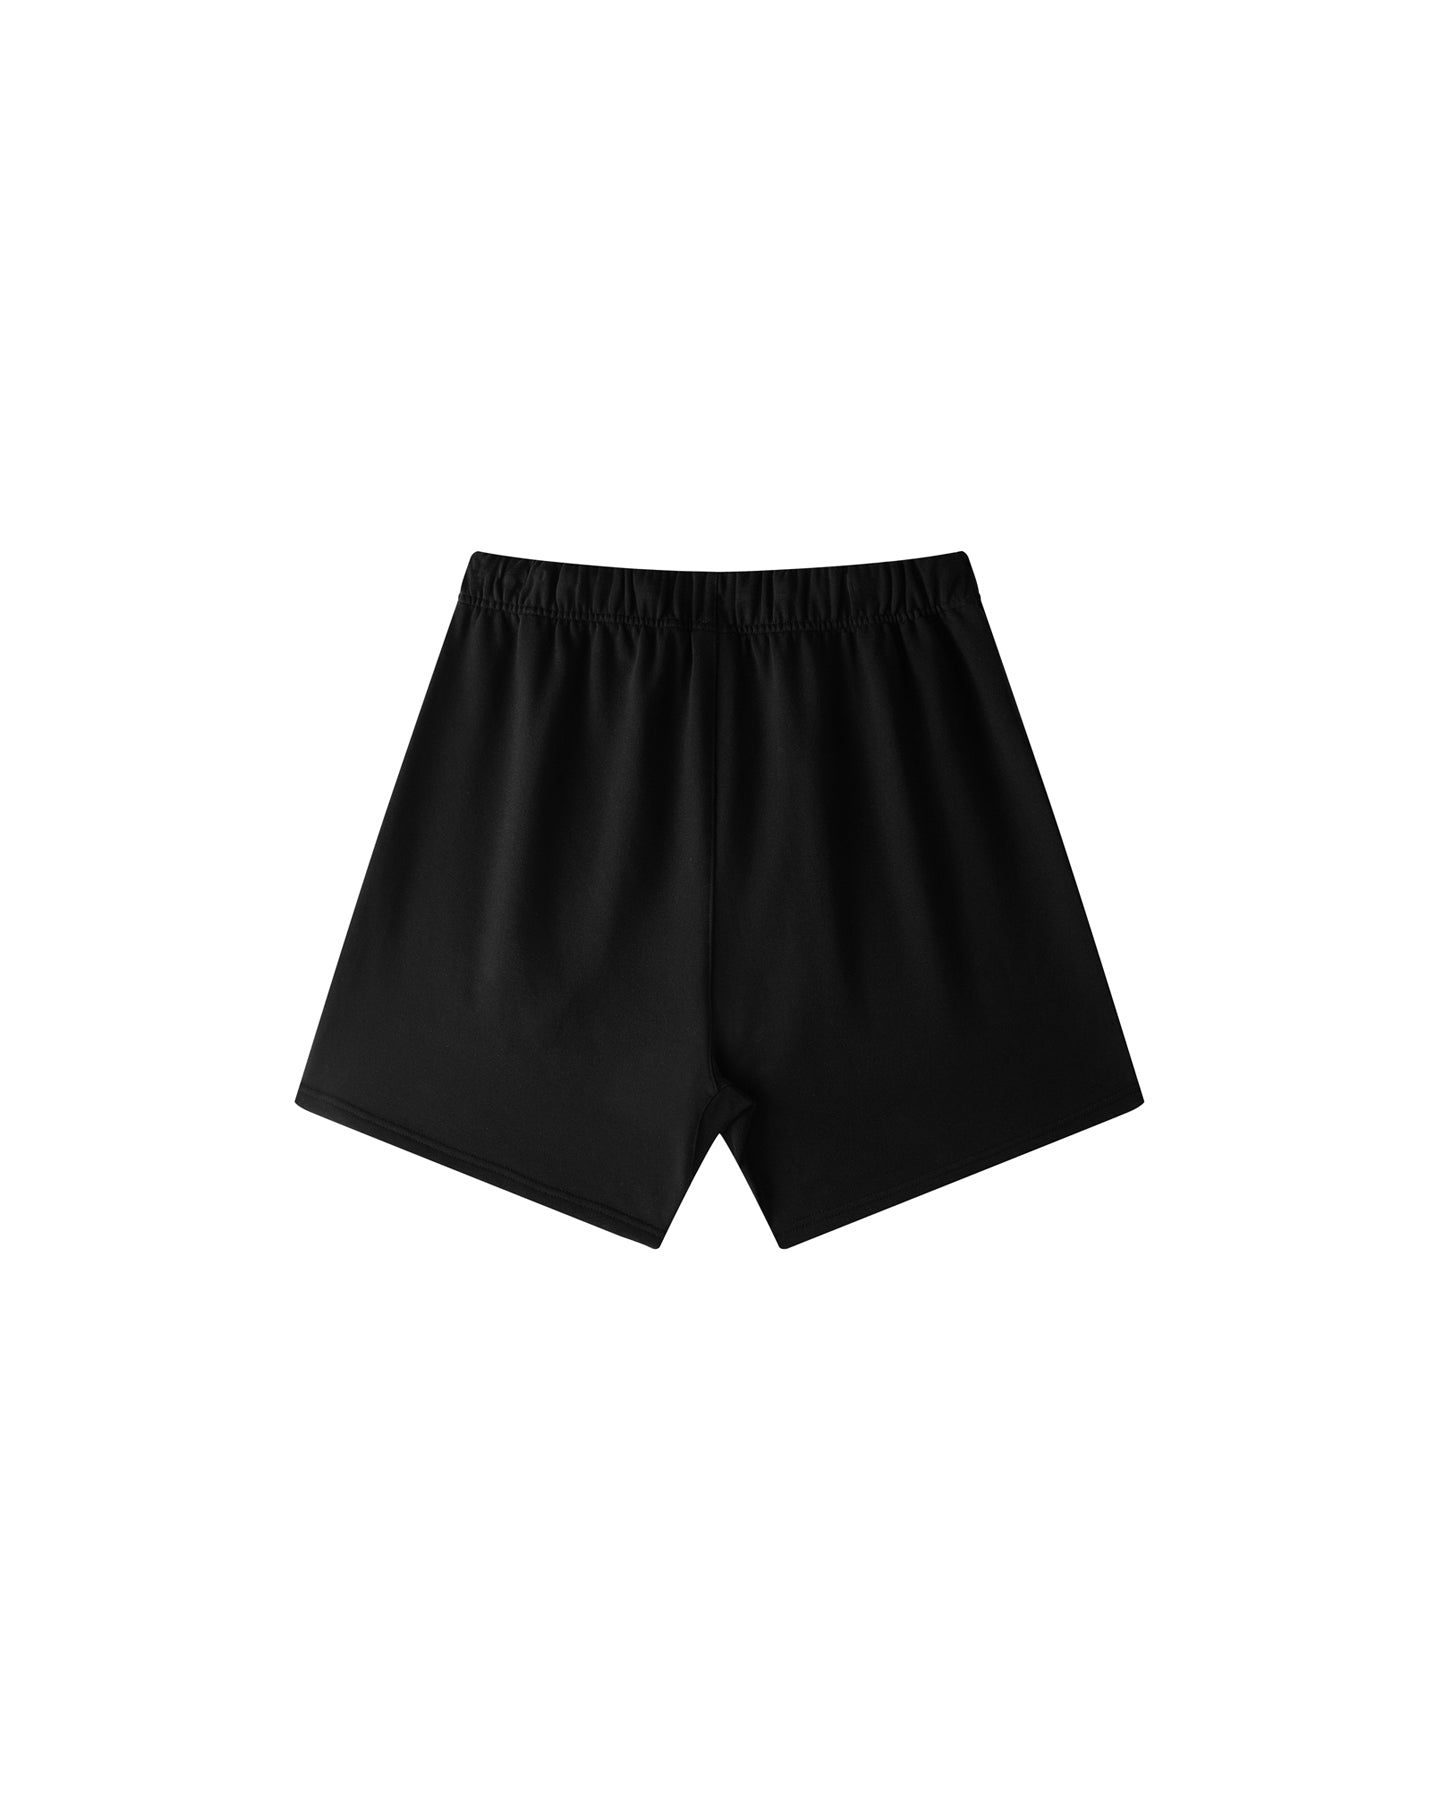 FEED THE FLAME SHORTS - BLACK